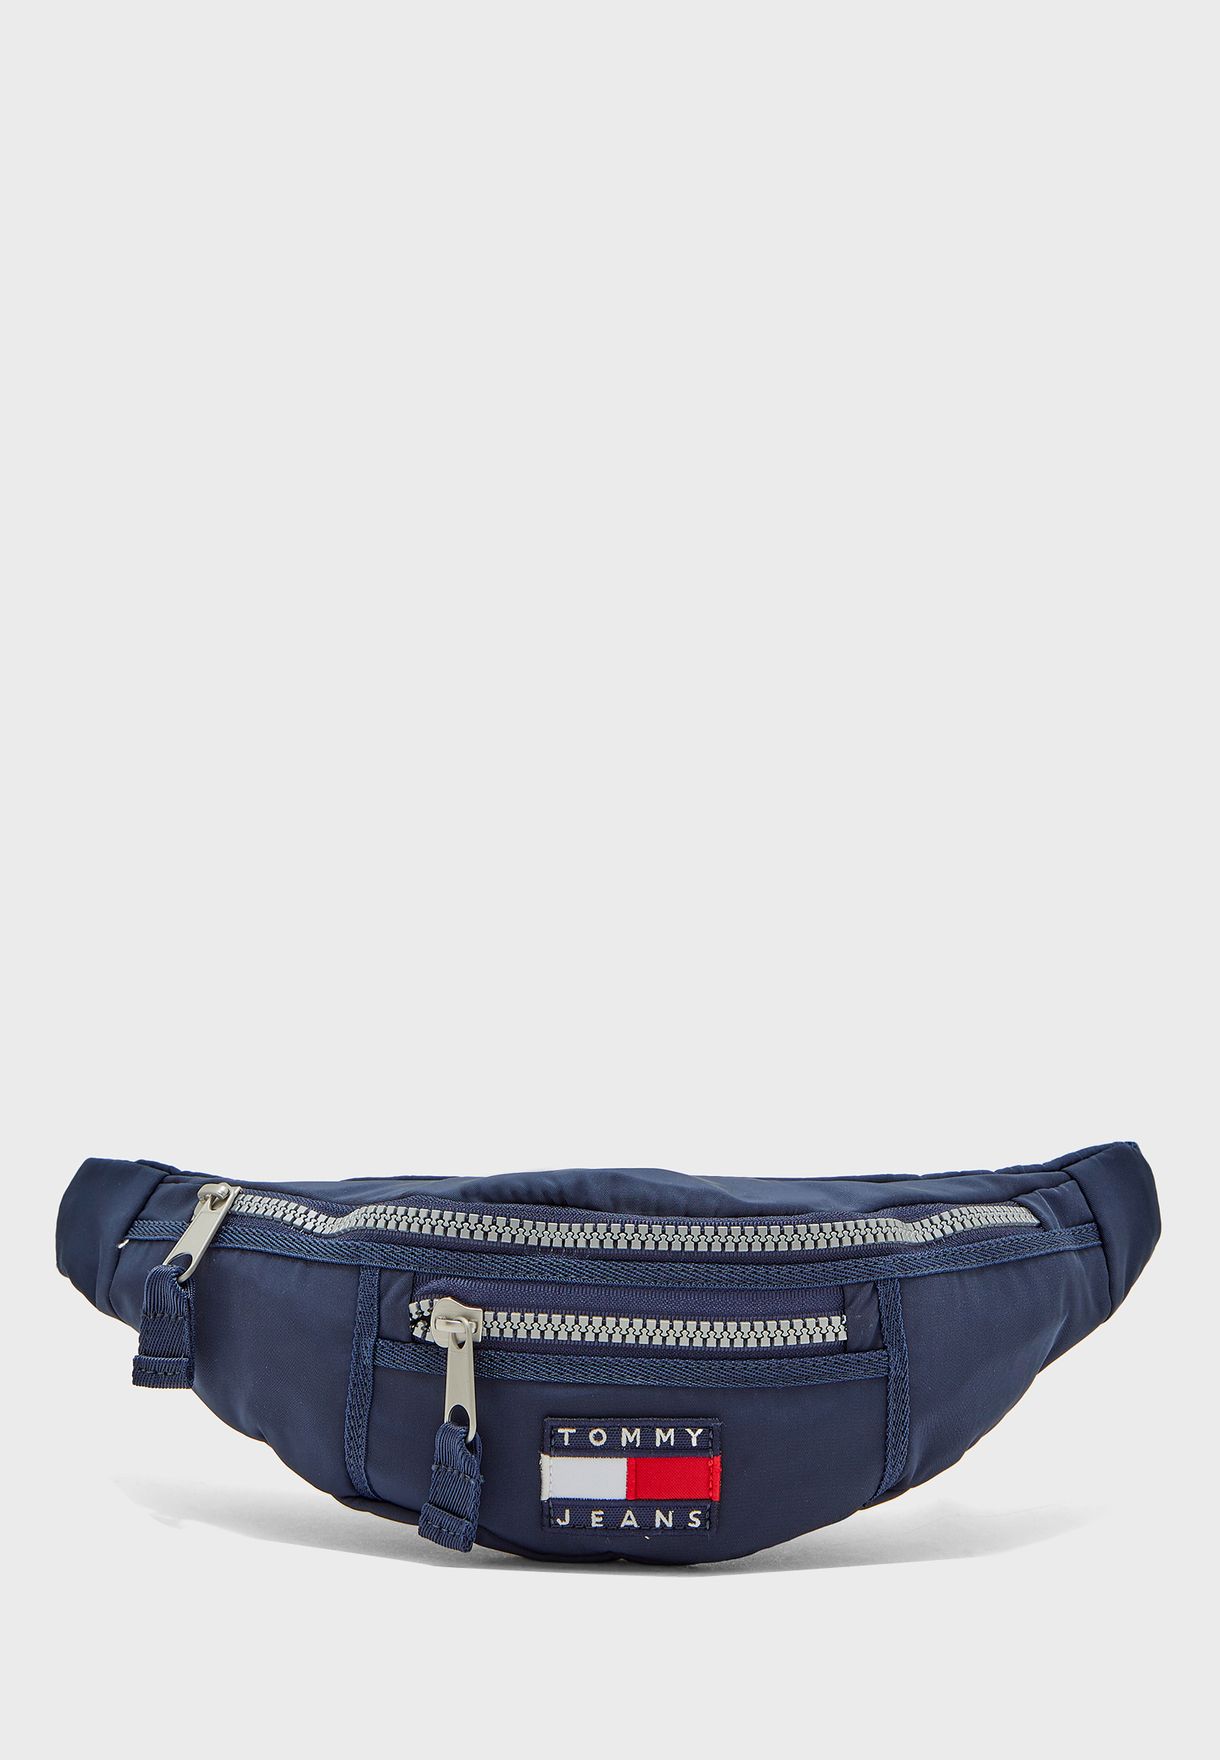 Buy Tommy Jeans navy Heritage Bum Bag 